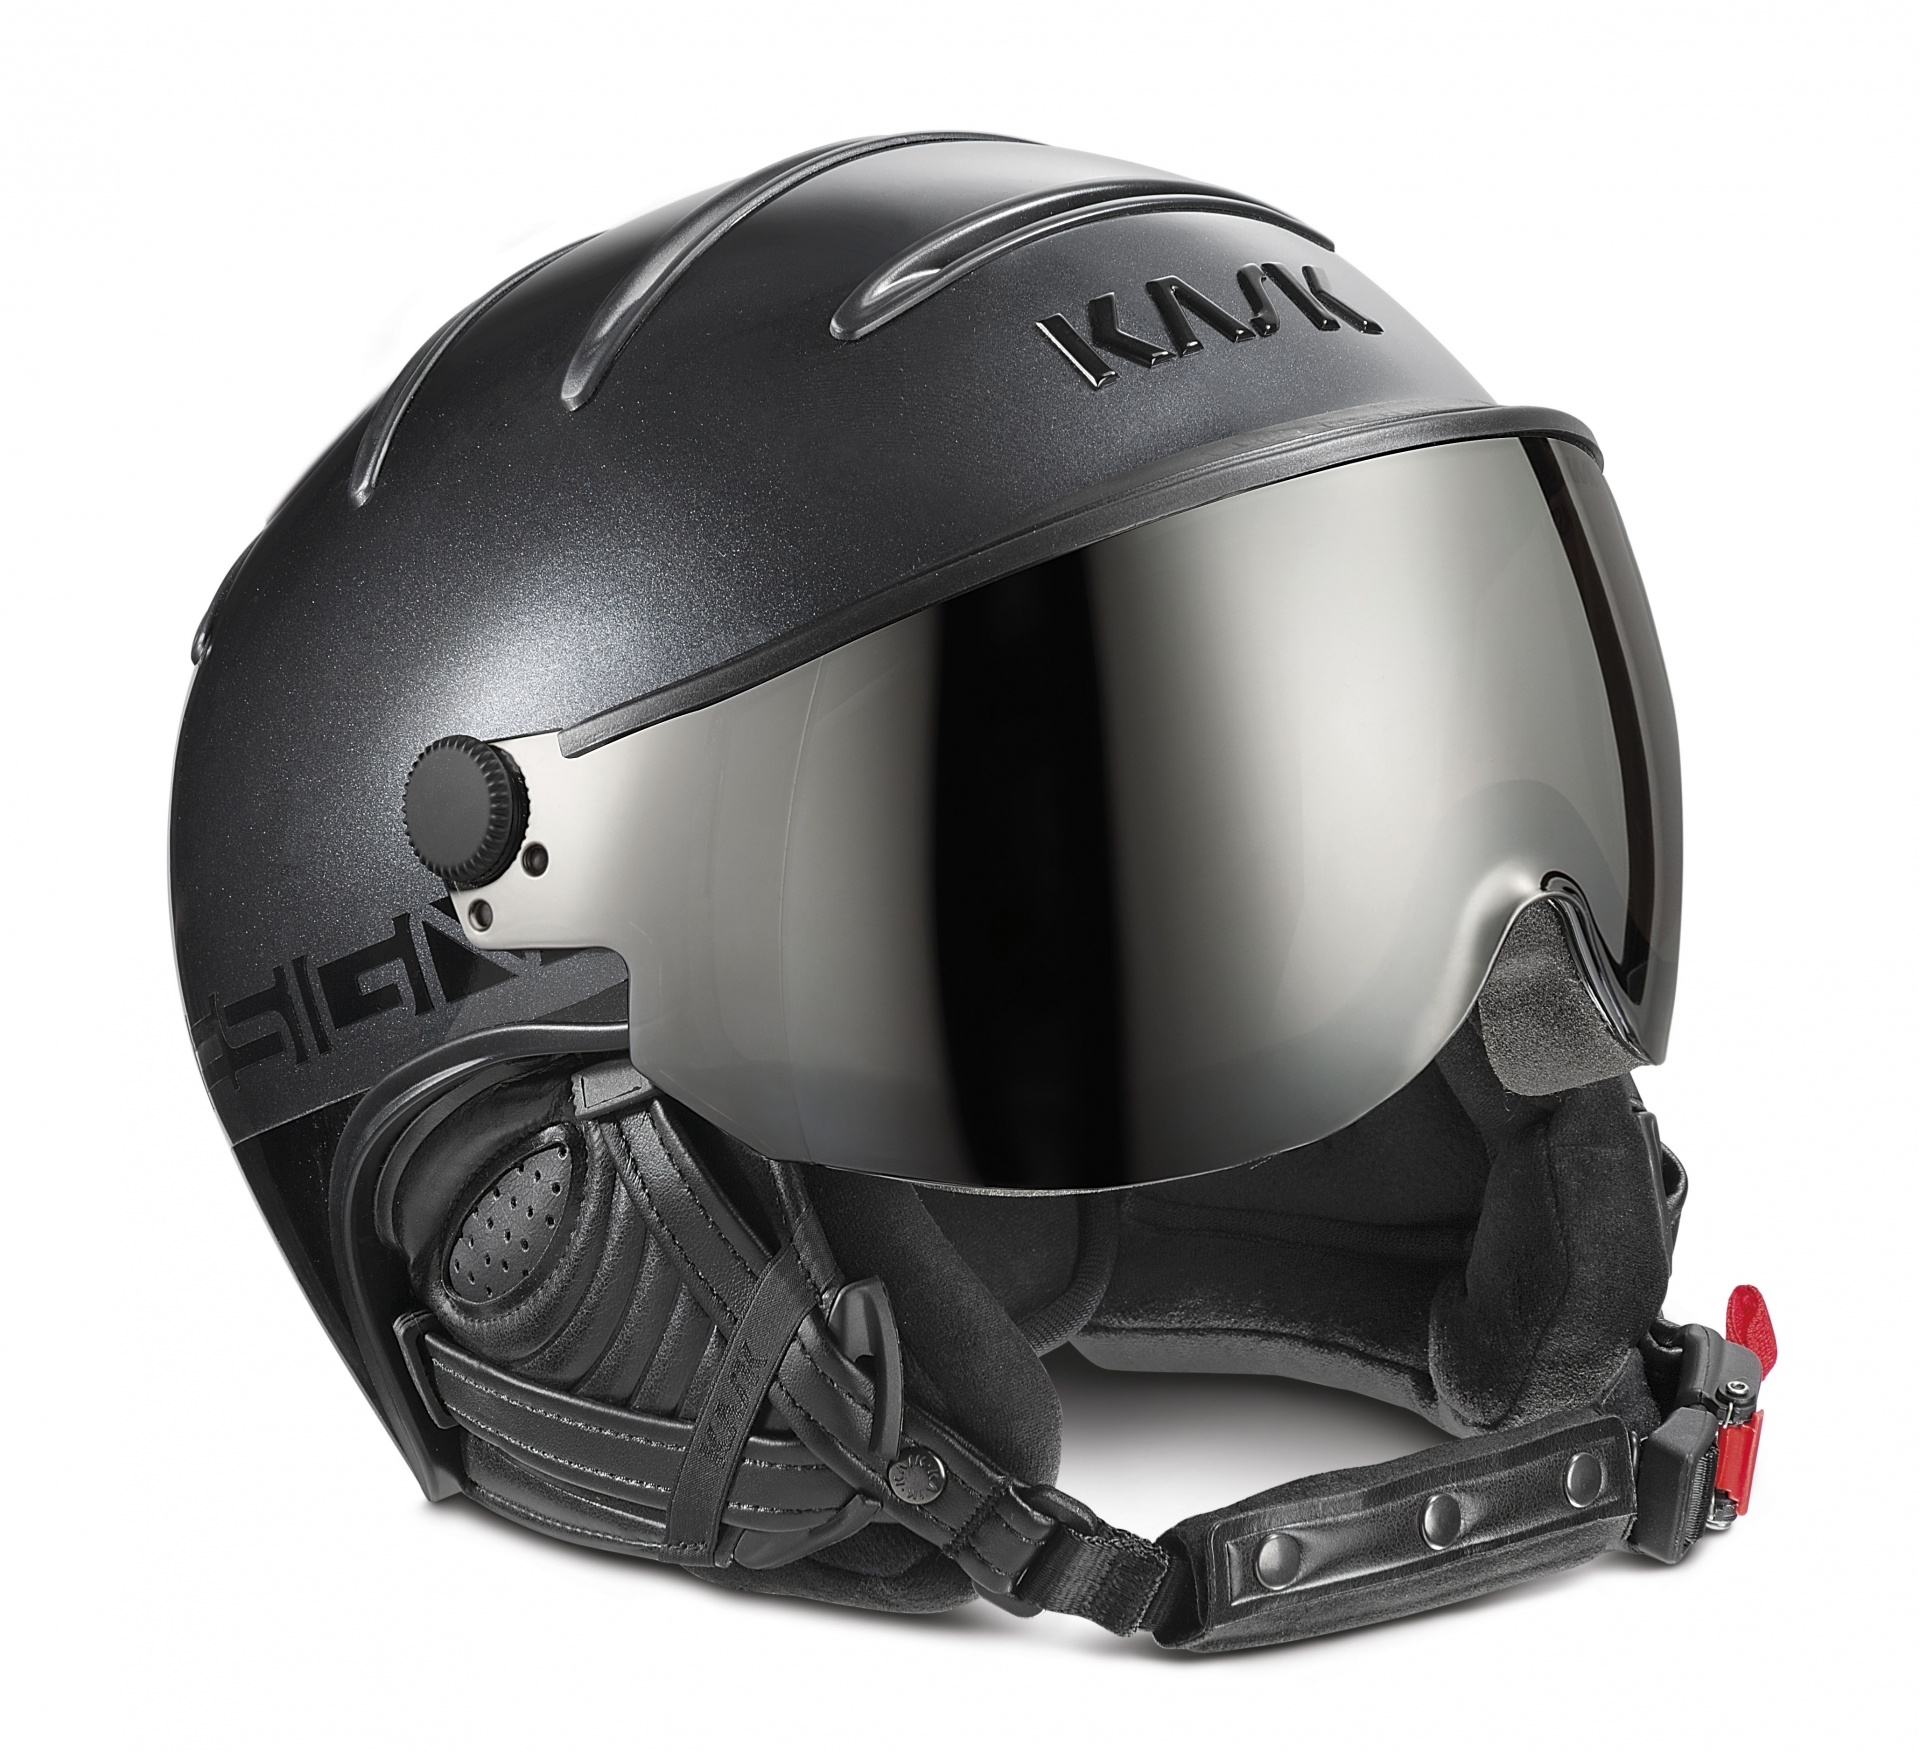 Kask Anthracite - Wintersport-store.com